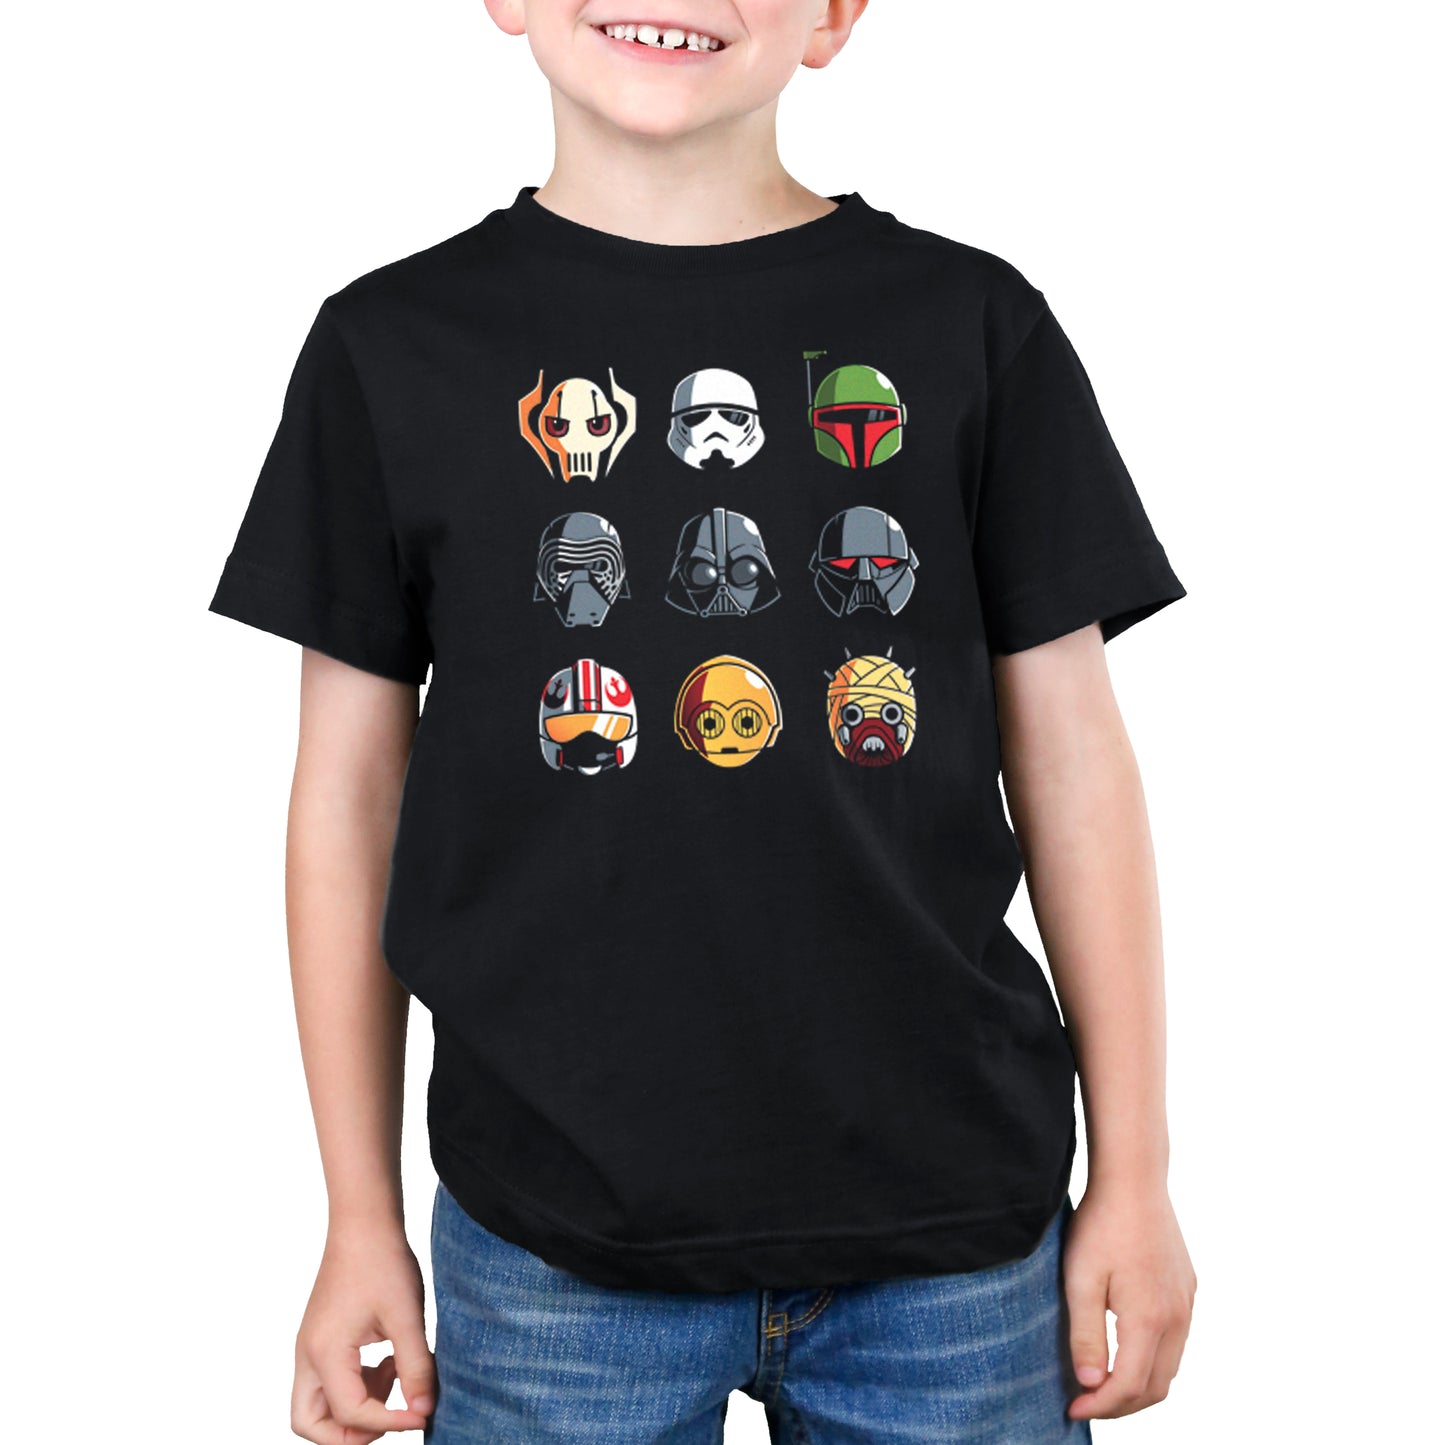 A young boy wearing a licensed Star Wars Masks t-shirt.